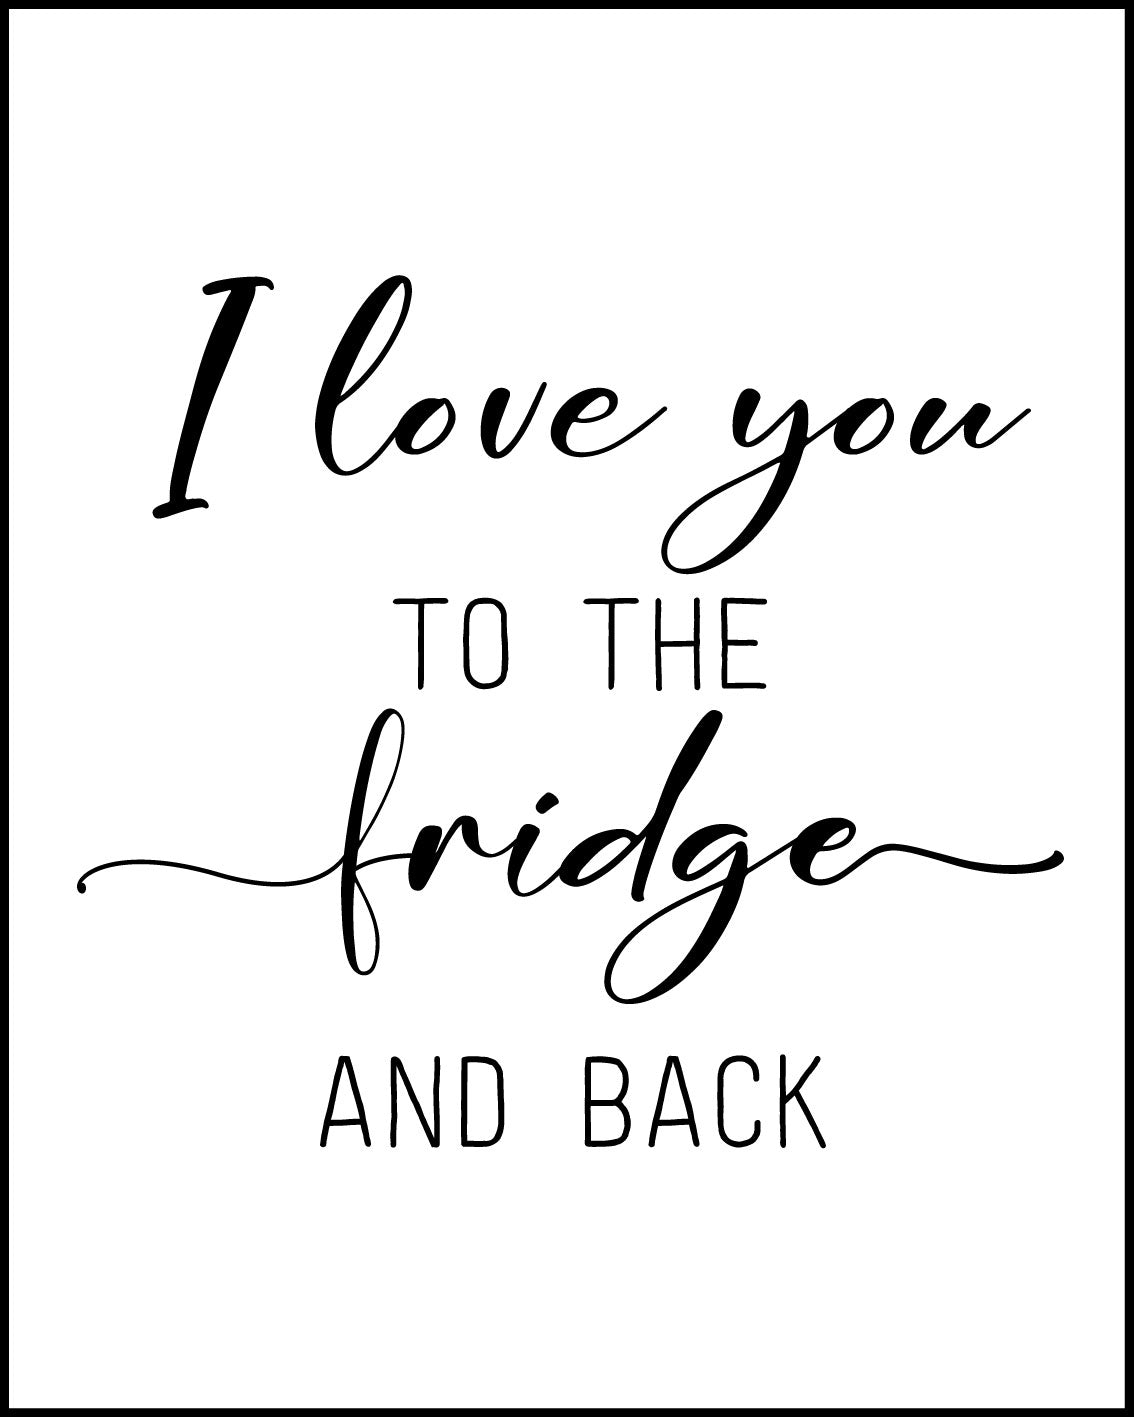 I love you to the fridge and back Poster